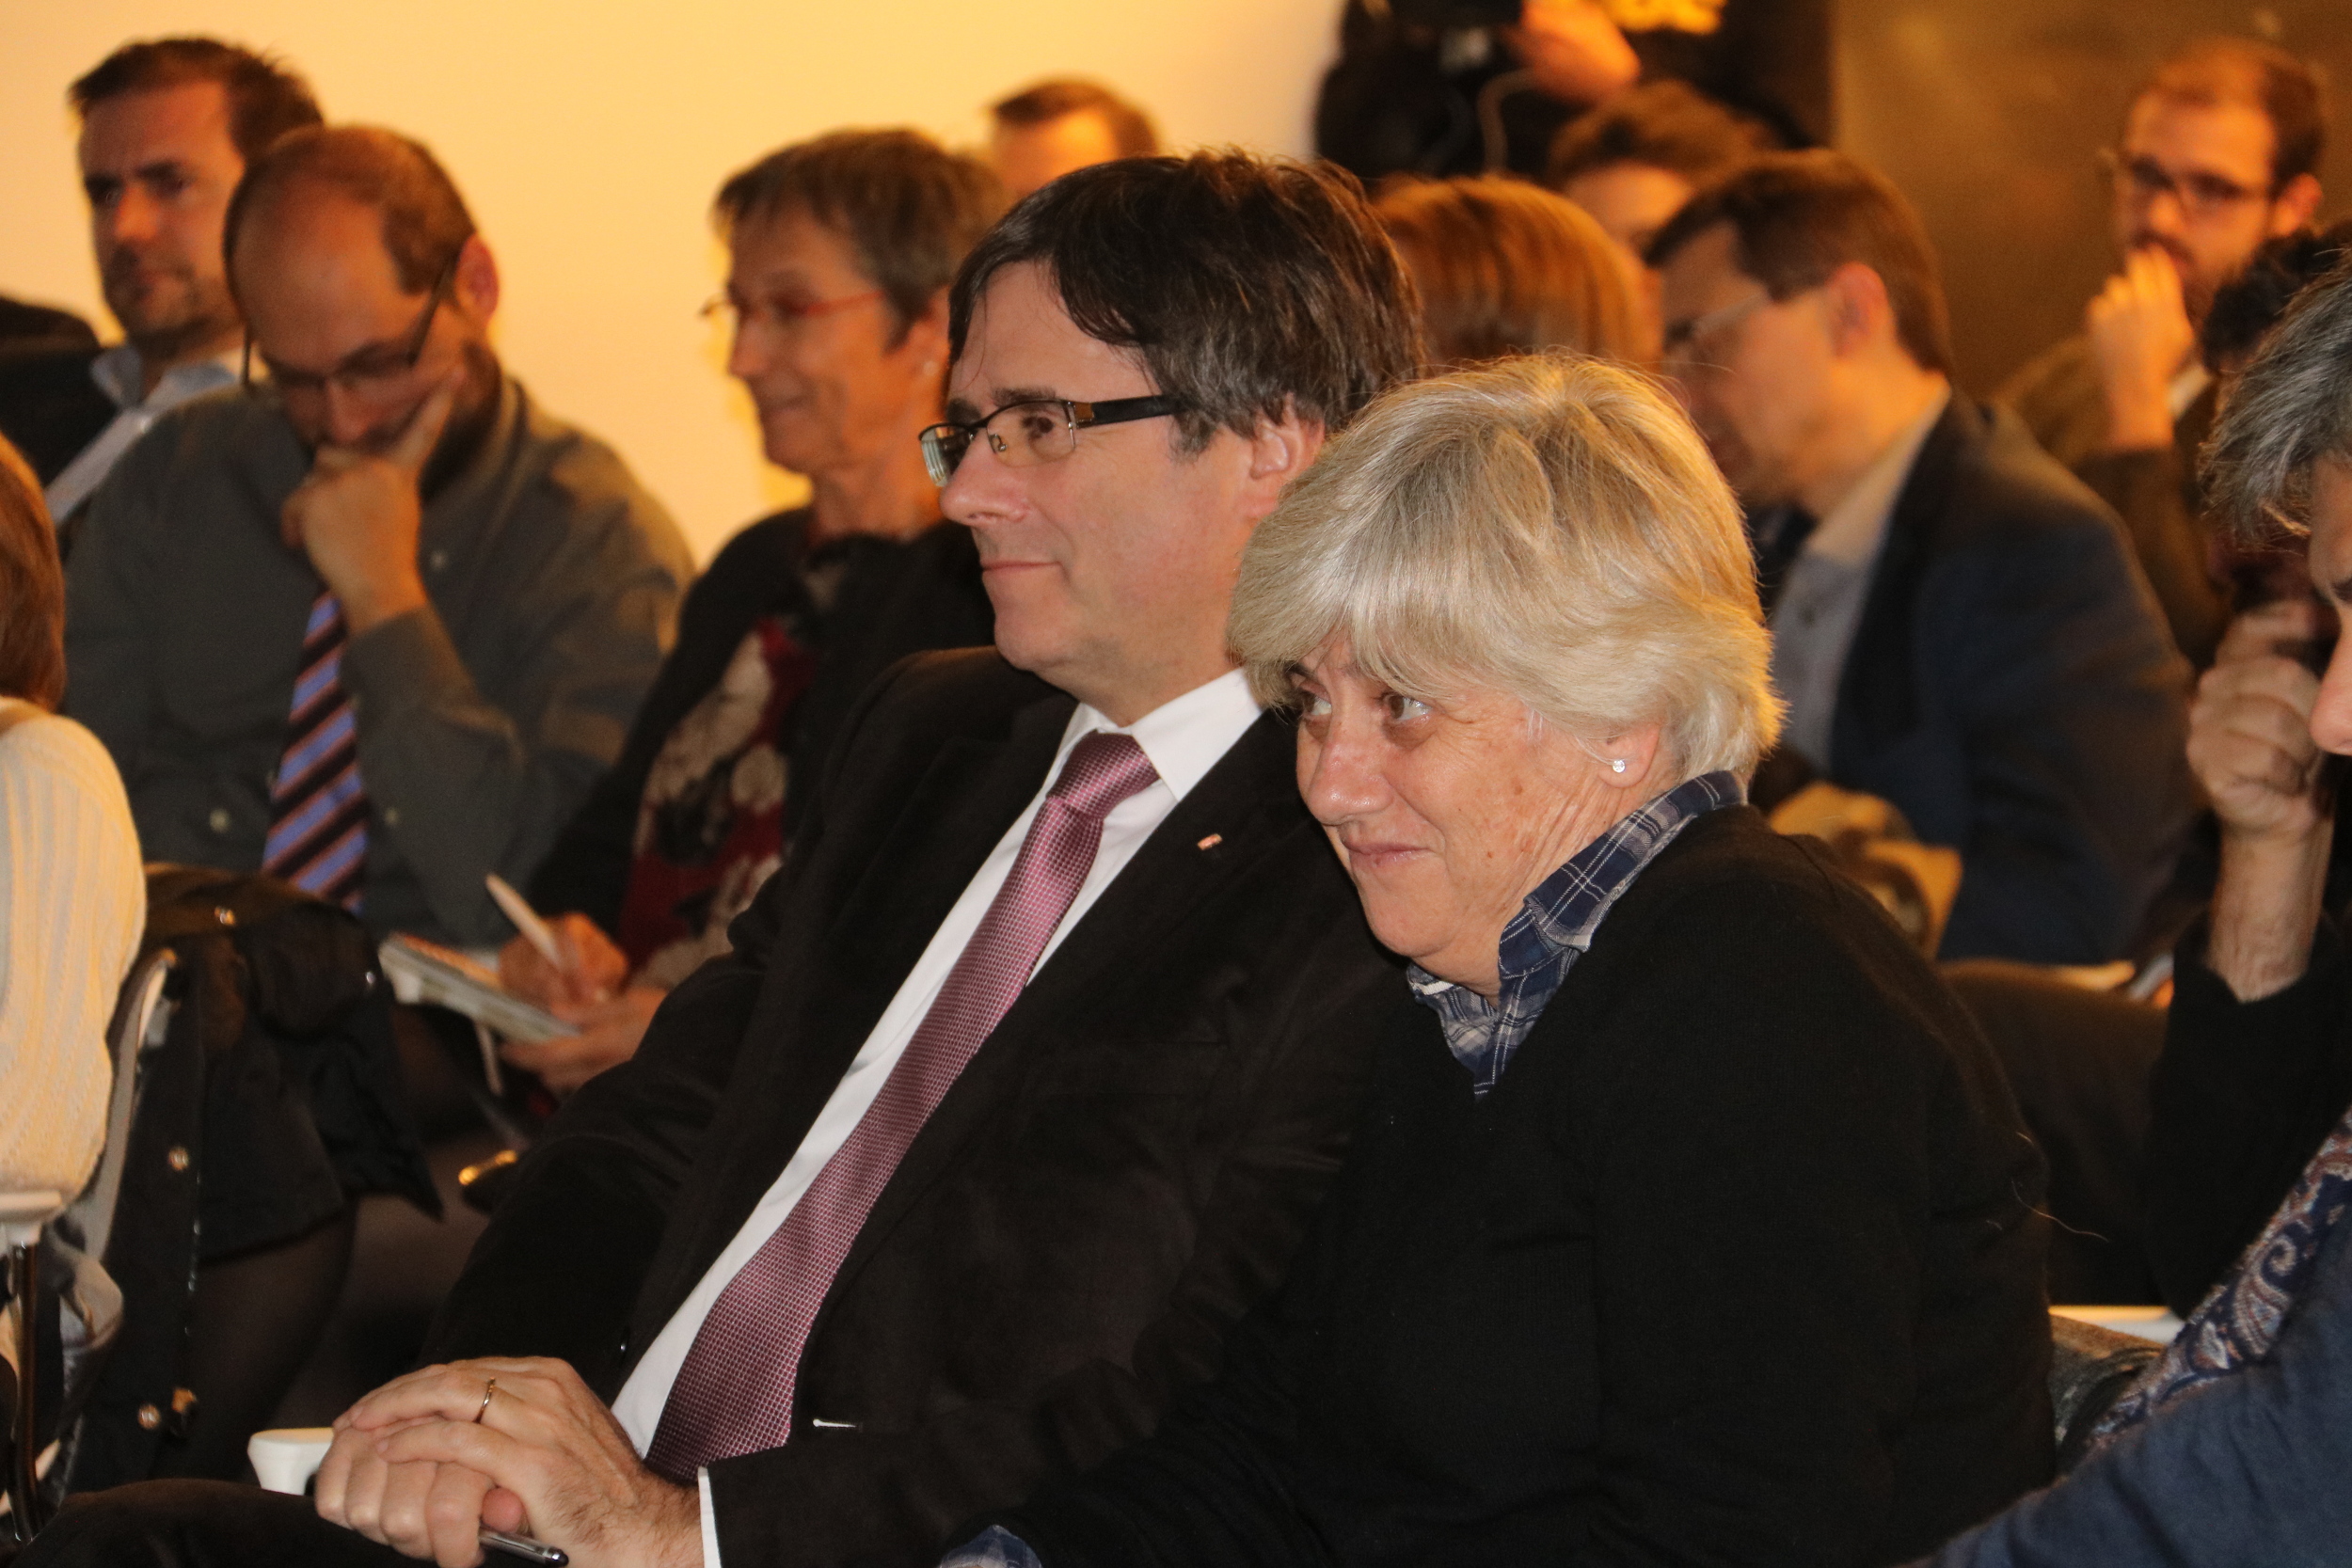 Deposed Catalan president Carles Puigdemont (left) and dismissed minister Clara Ponsatí in Brussels (by Alba Barrionuevo)